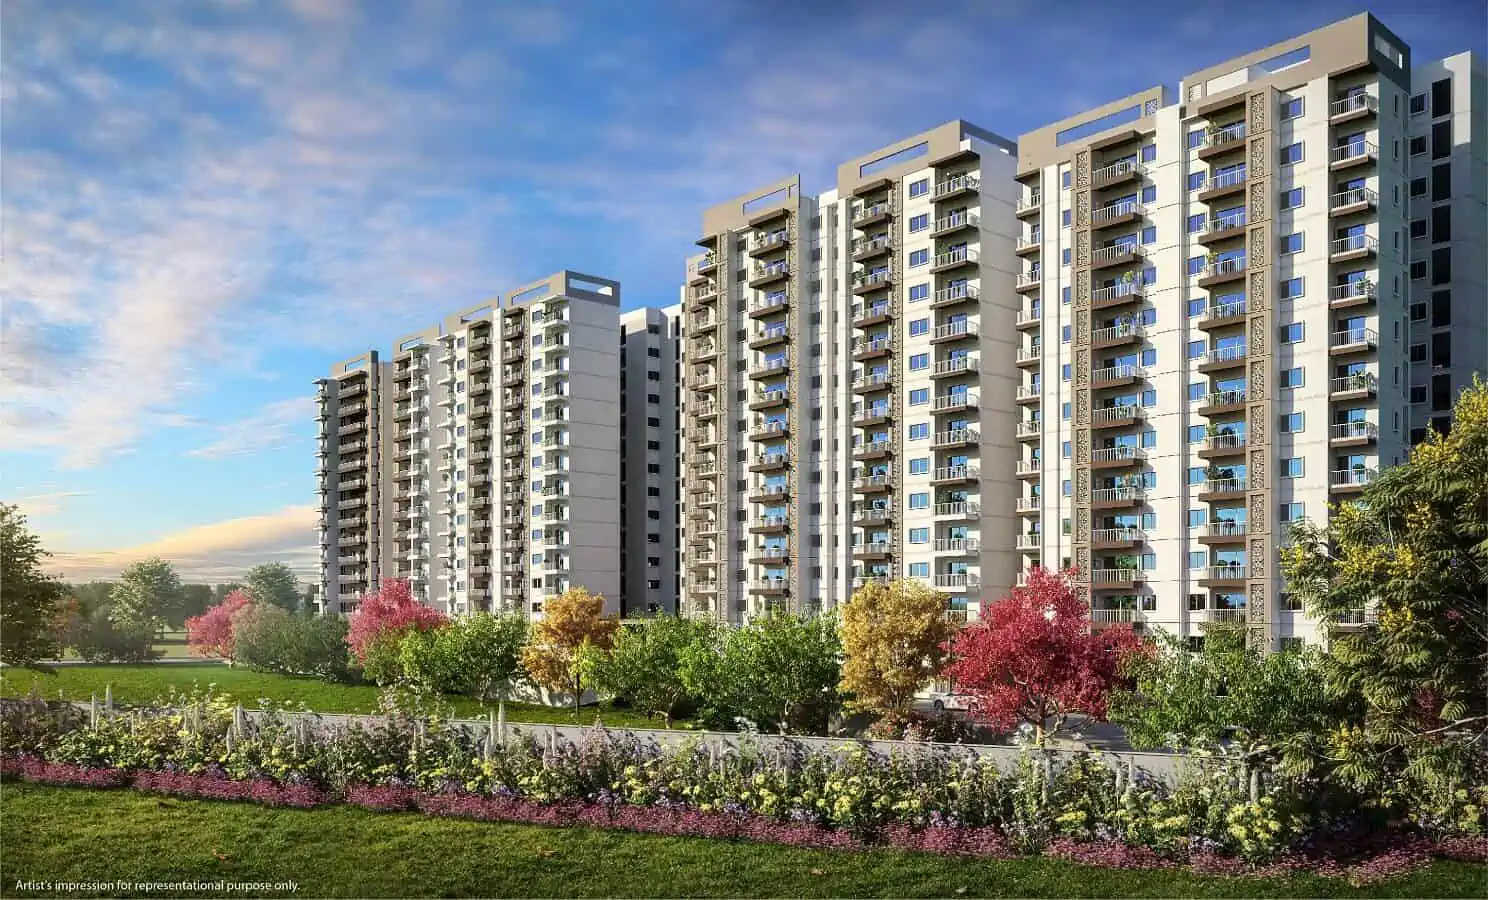 A Comprehensive Guide to Living at L&T Raintree Boulevard, Hebbal